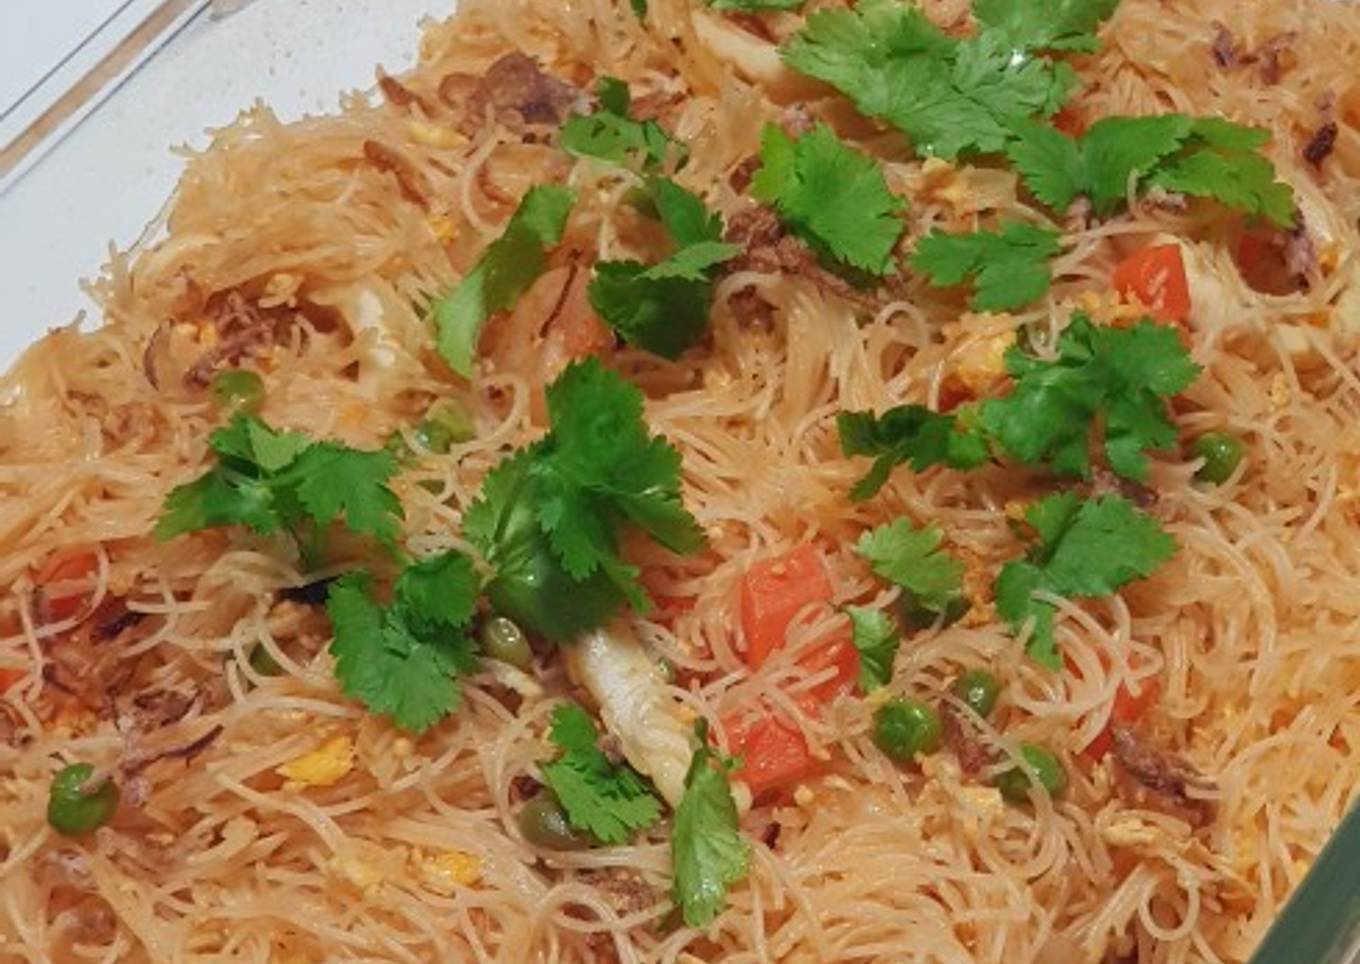 Canteen's Vermicelli Noodles